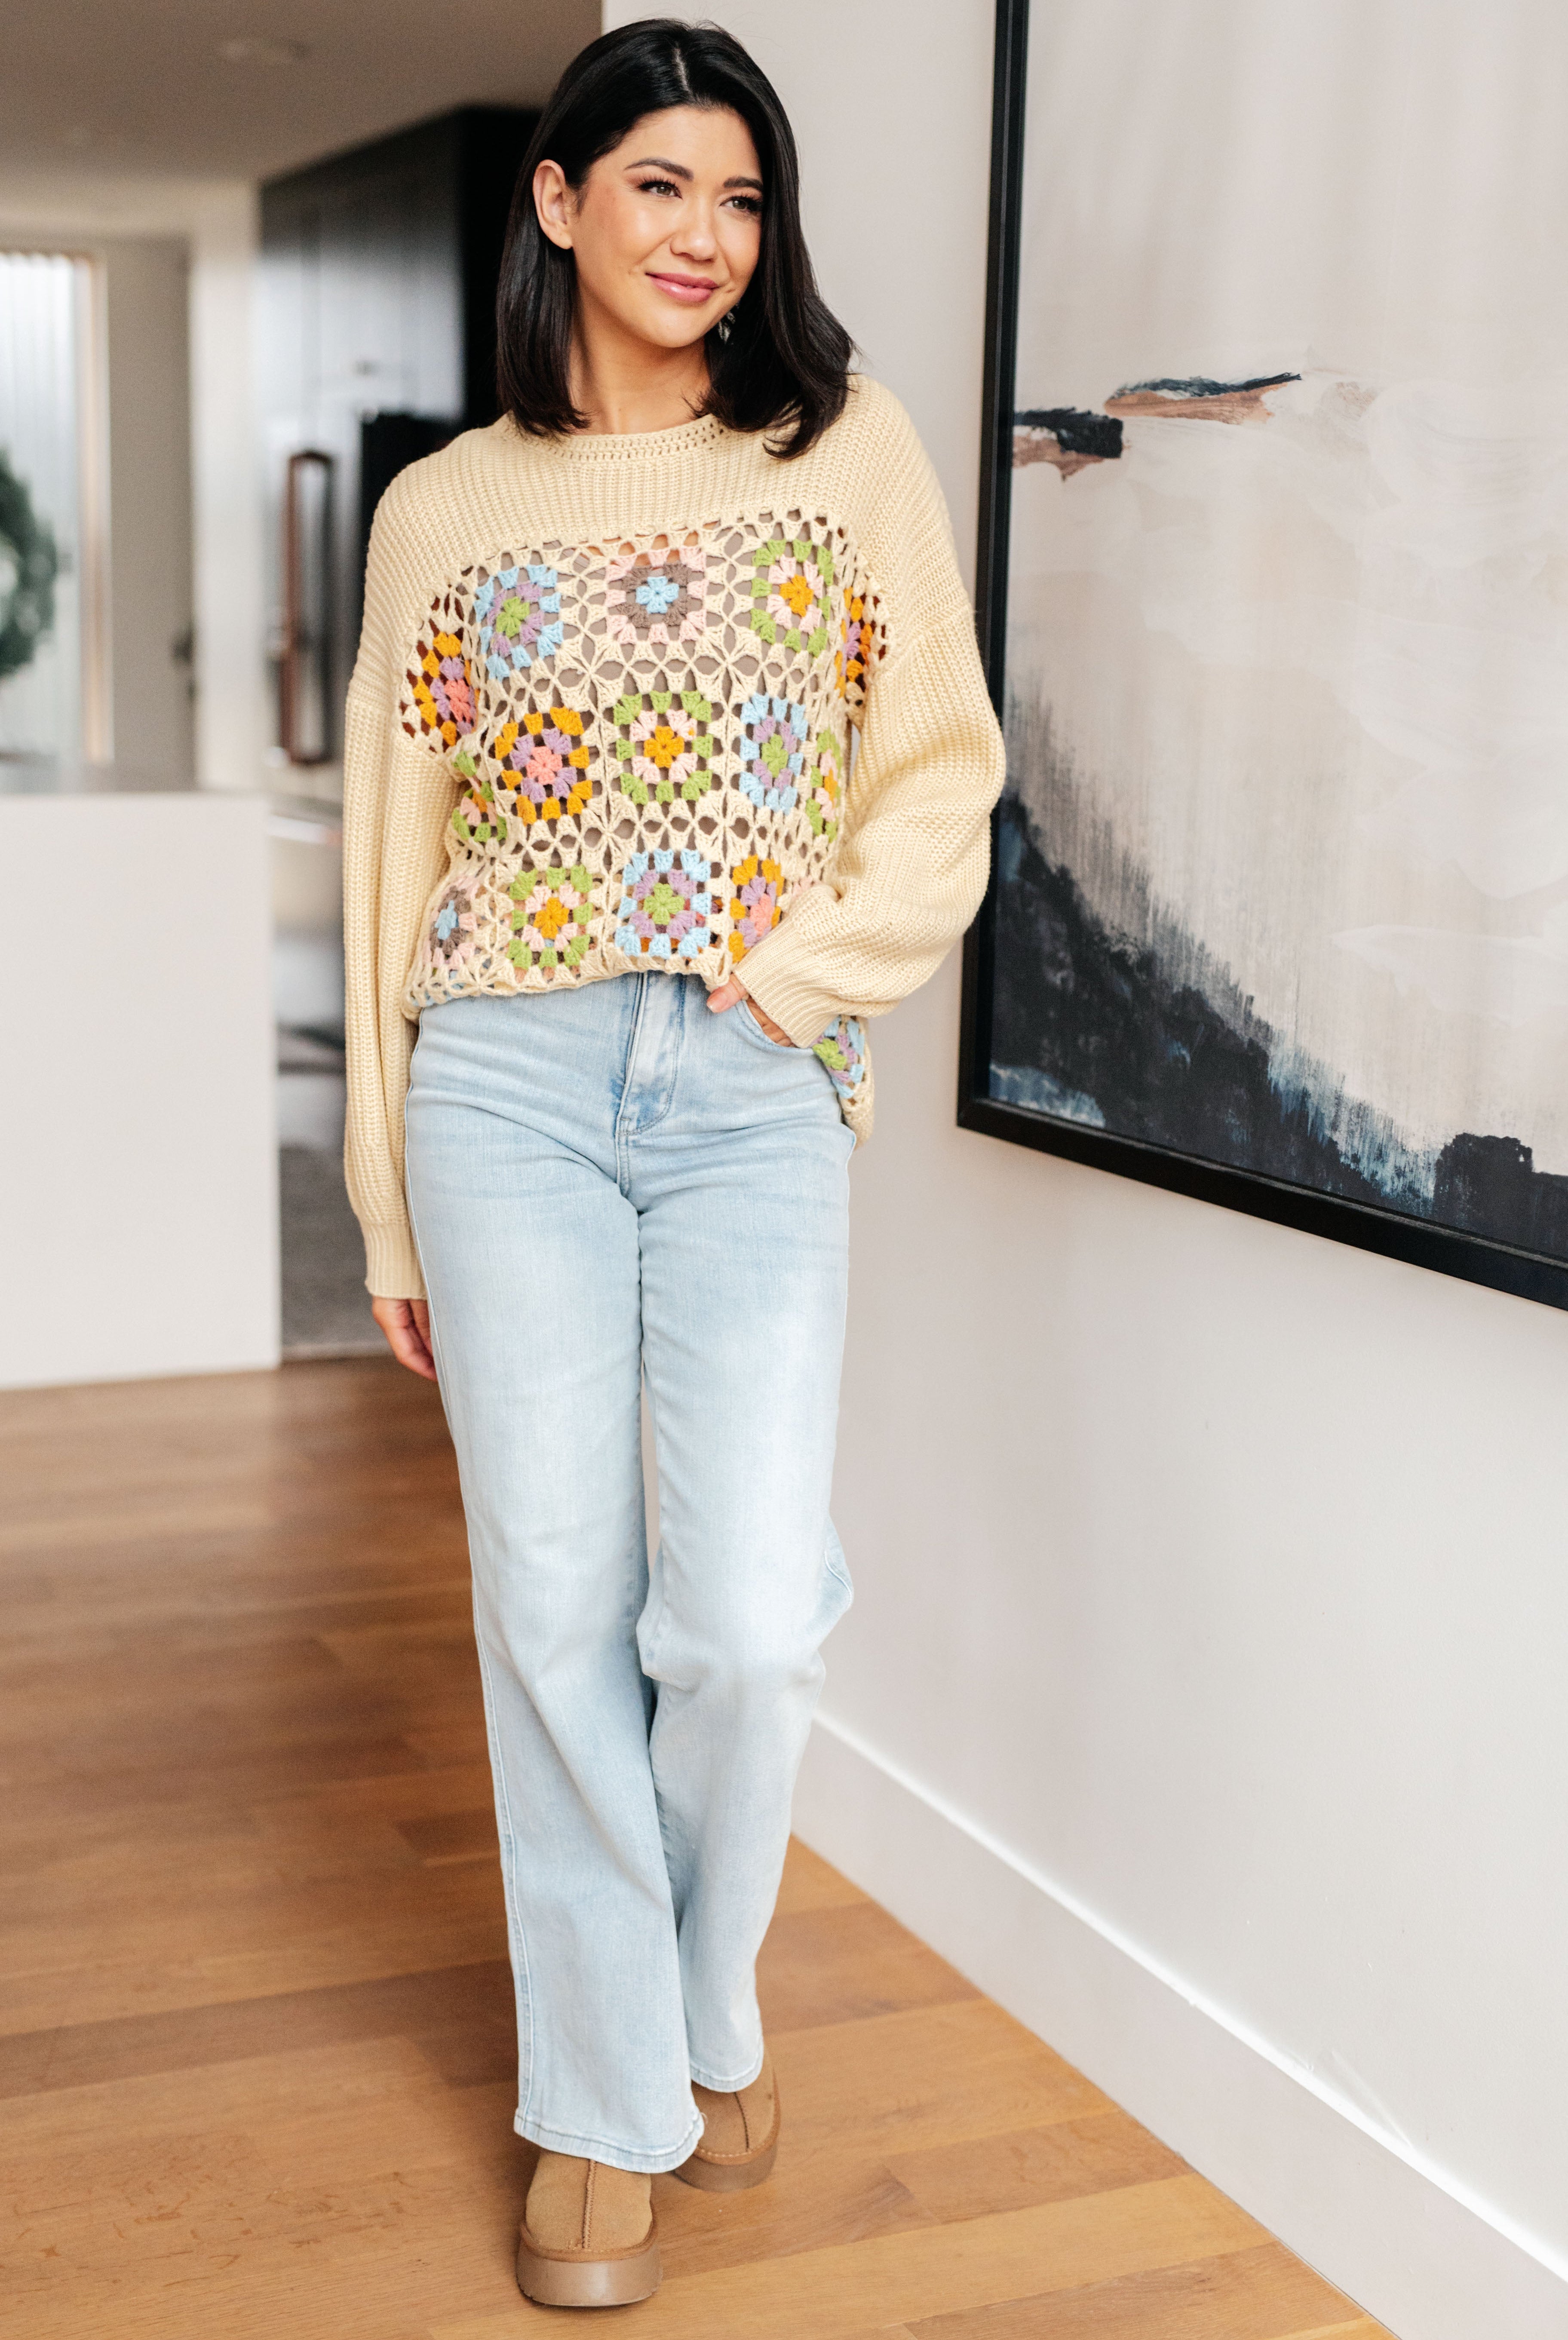 Square Dance Granny Square Sweater-Sweaters- Simply Simpson's Boutique is a Women's Online Fashion Boutique Located in Jupiter, Florida